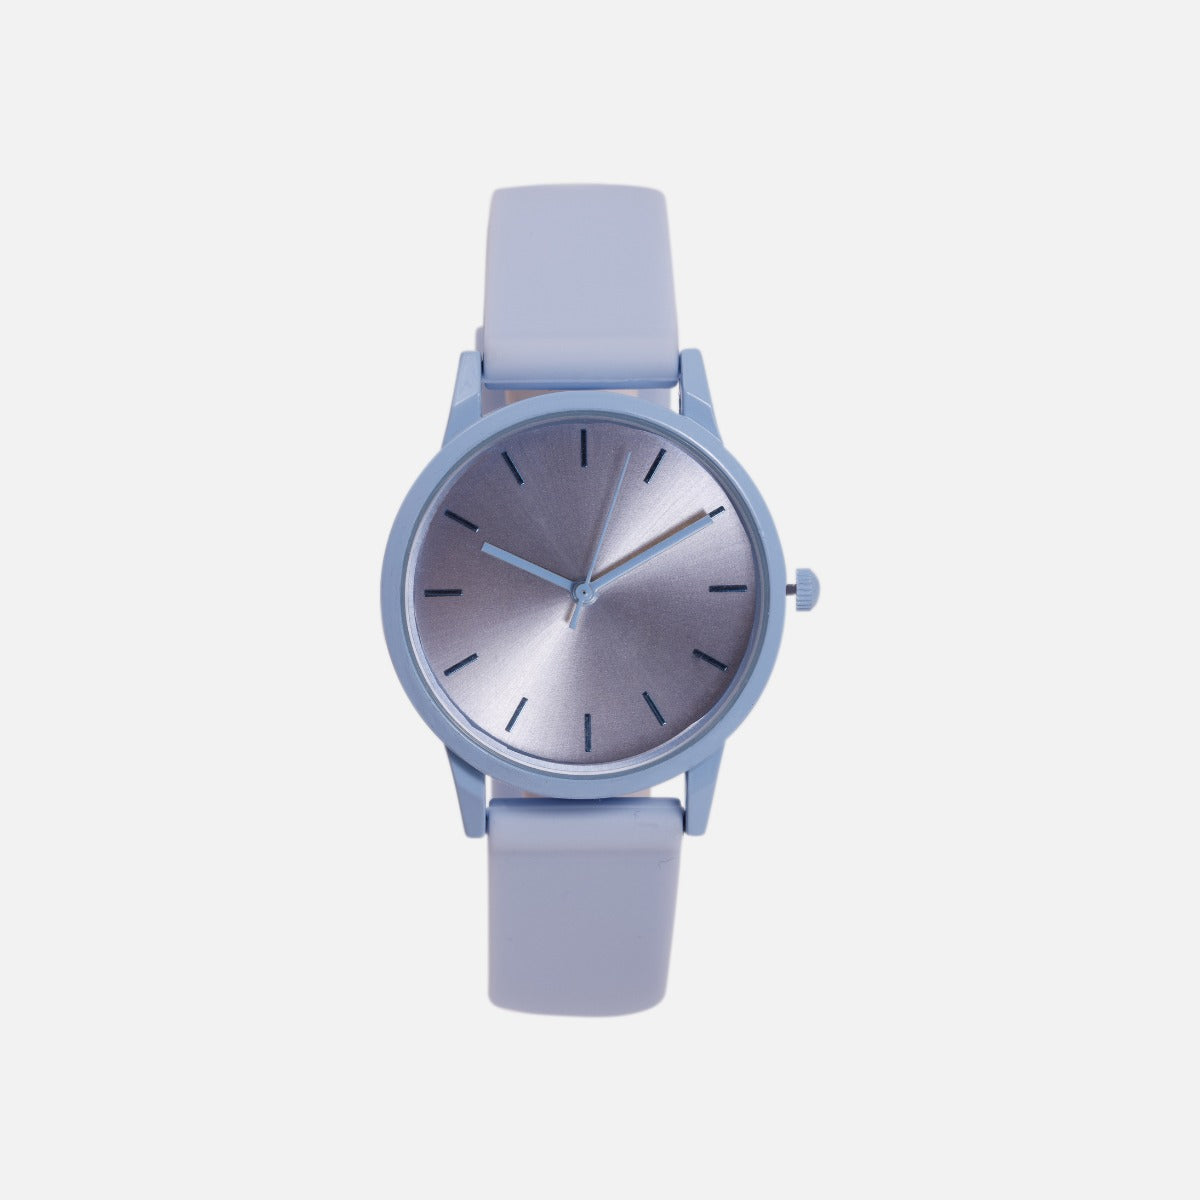 Innova collection - blue watch with round dial and silicone strap